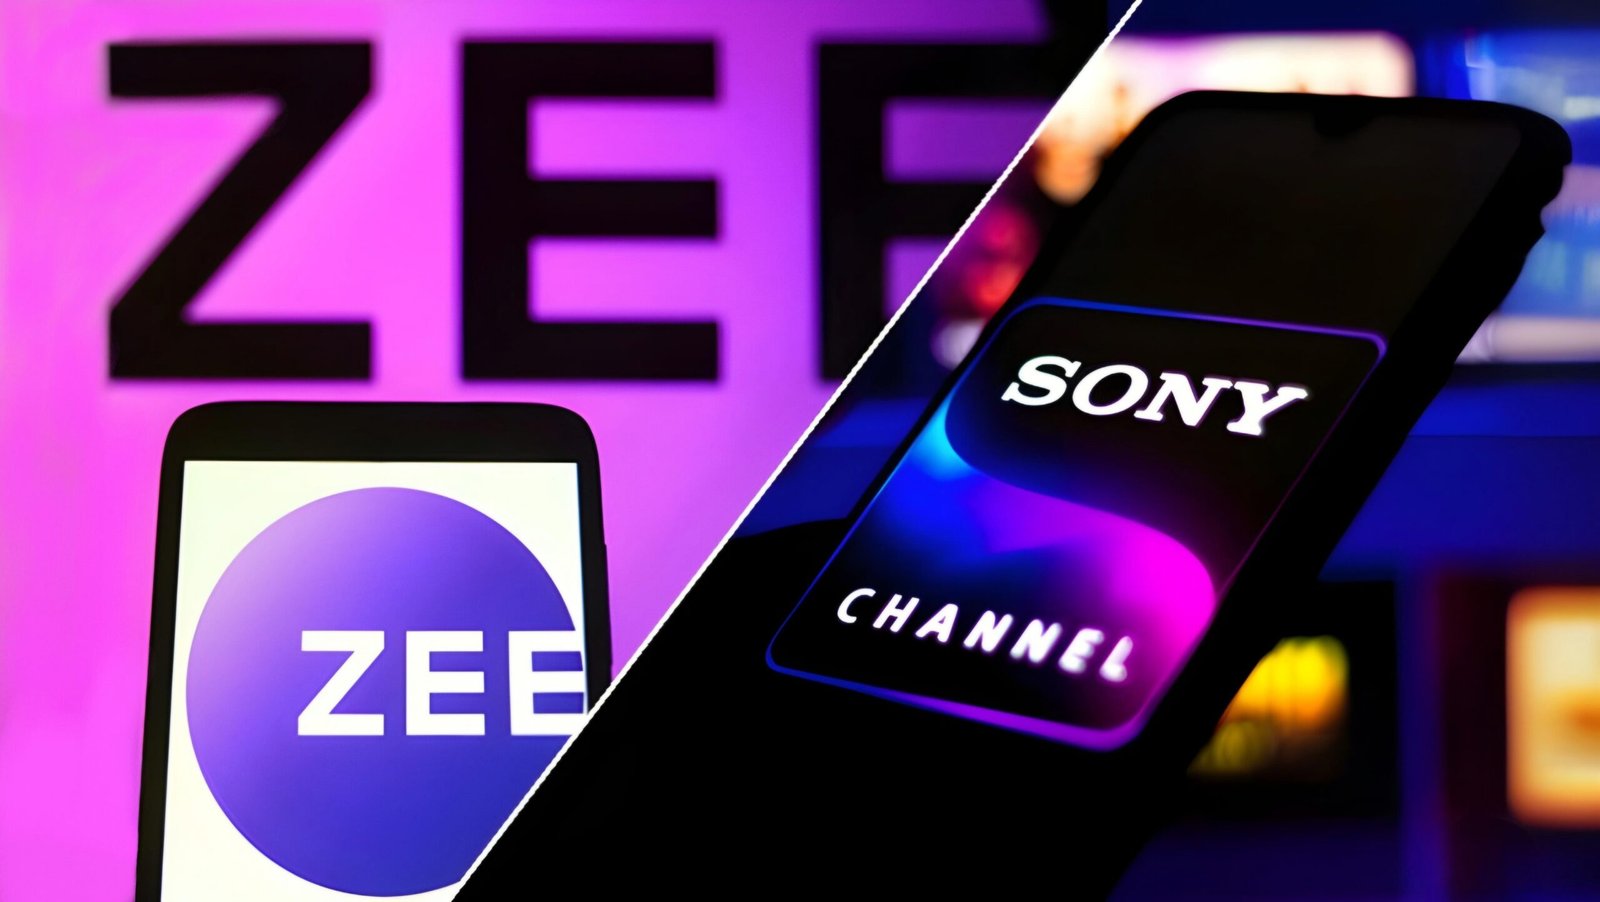 Sony cancels merger plans with Zee